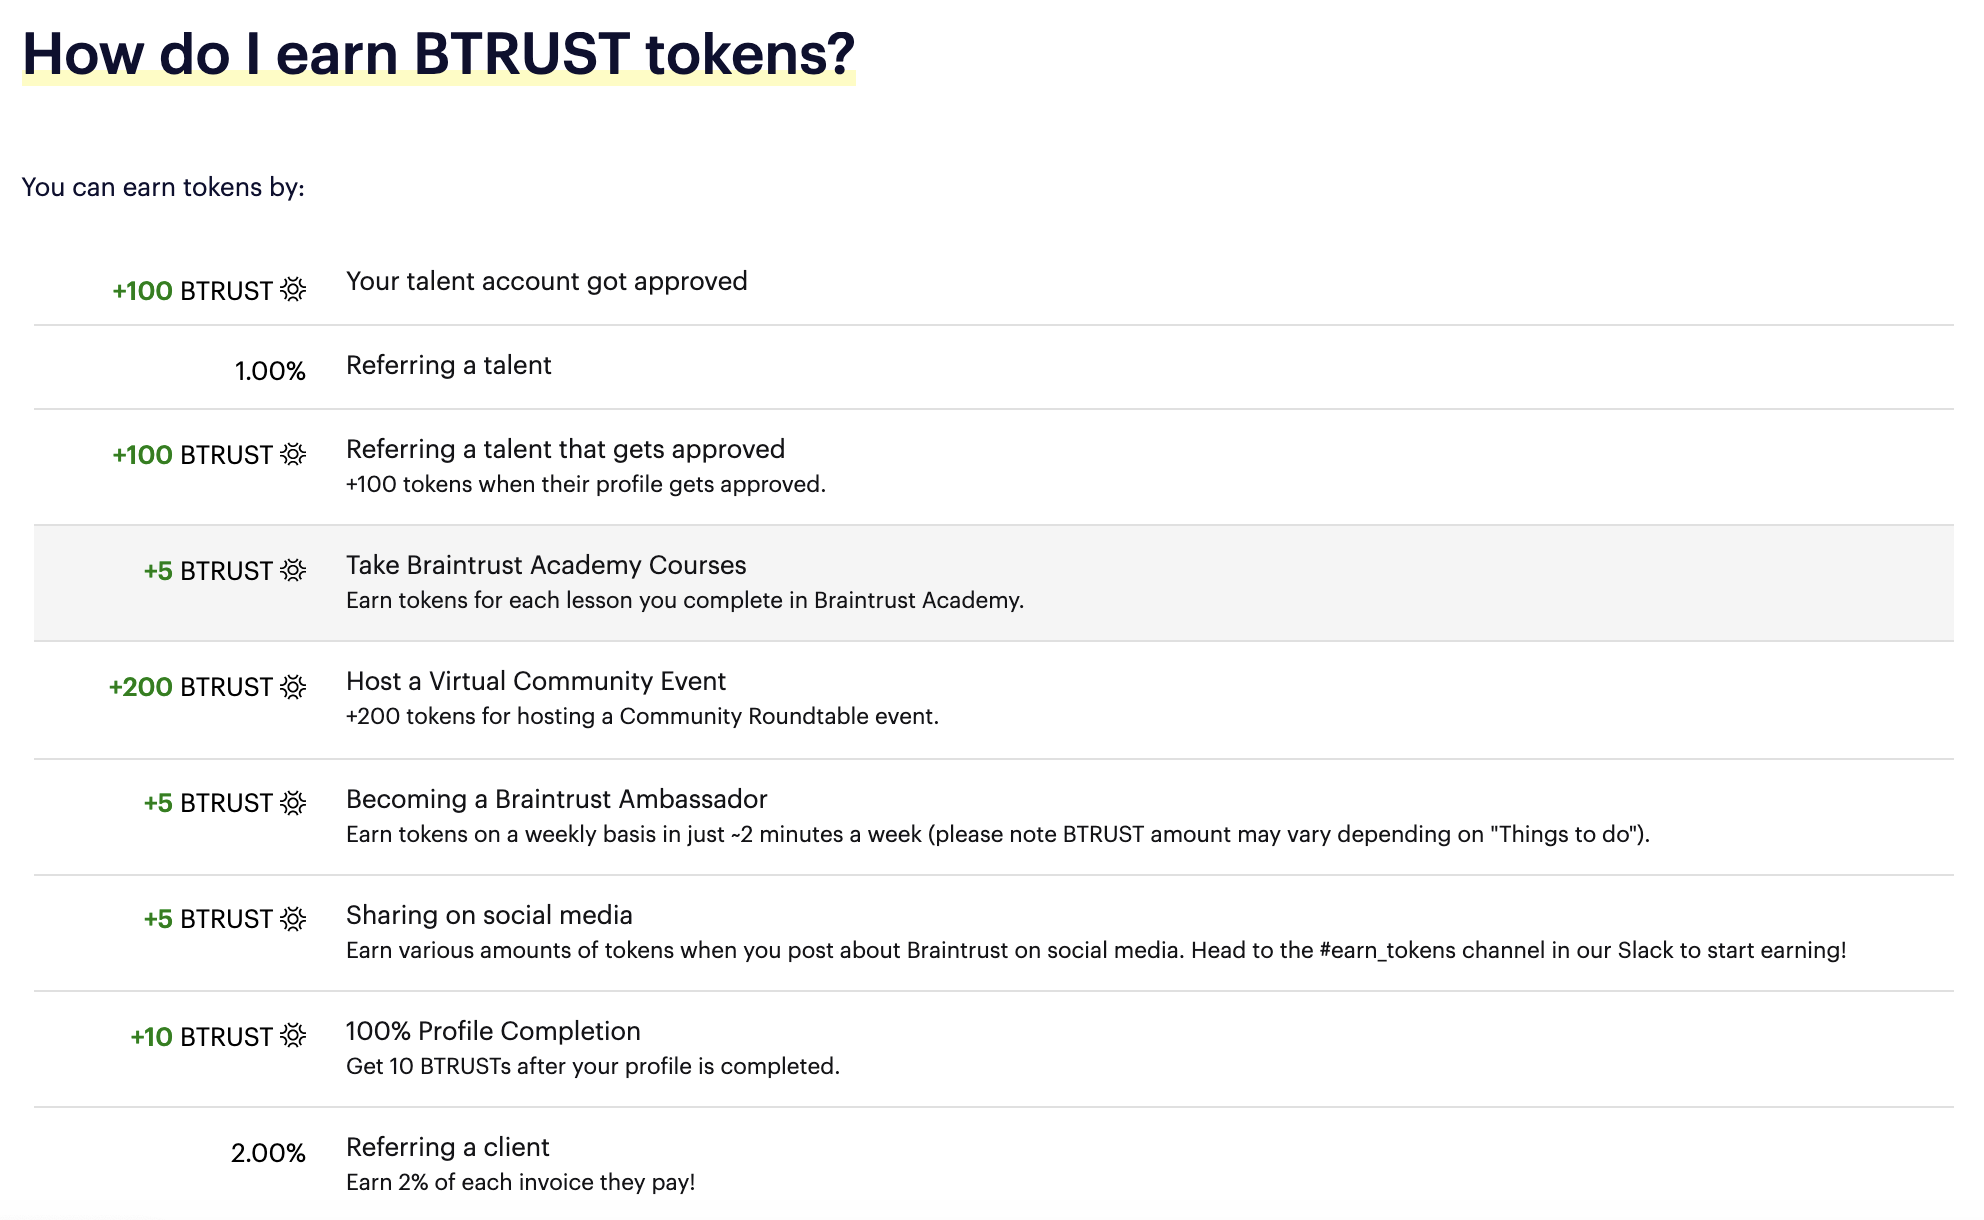 The 10 Biggest Misconceptions About Braintrust - Earning btrst tokens